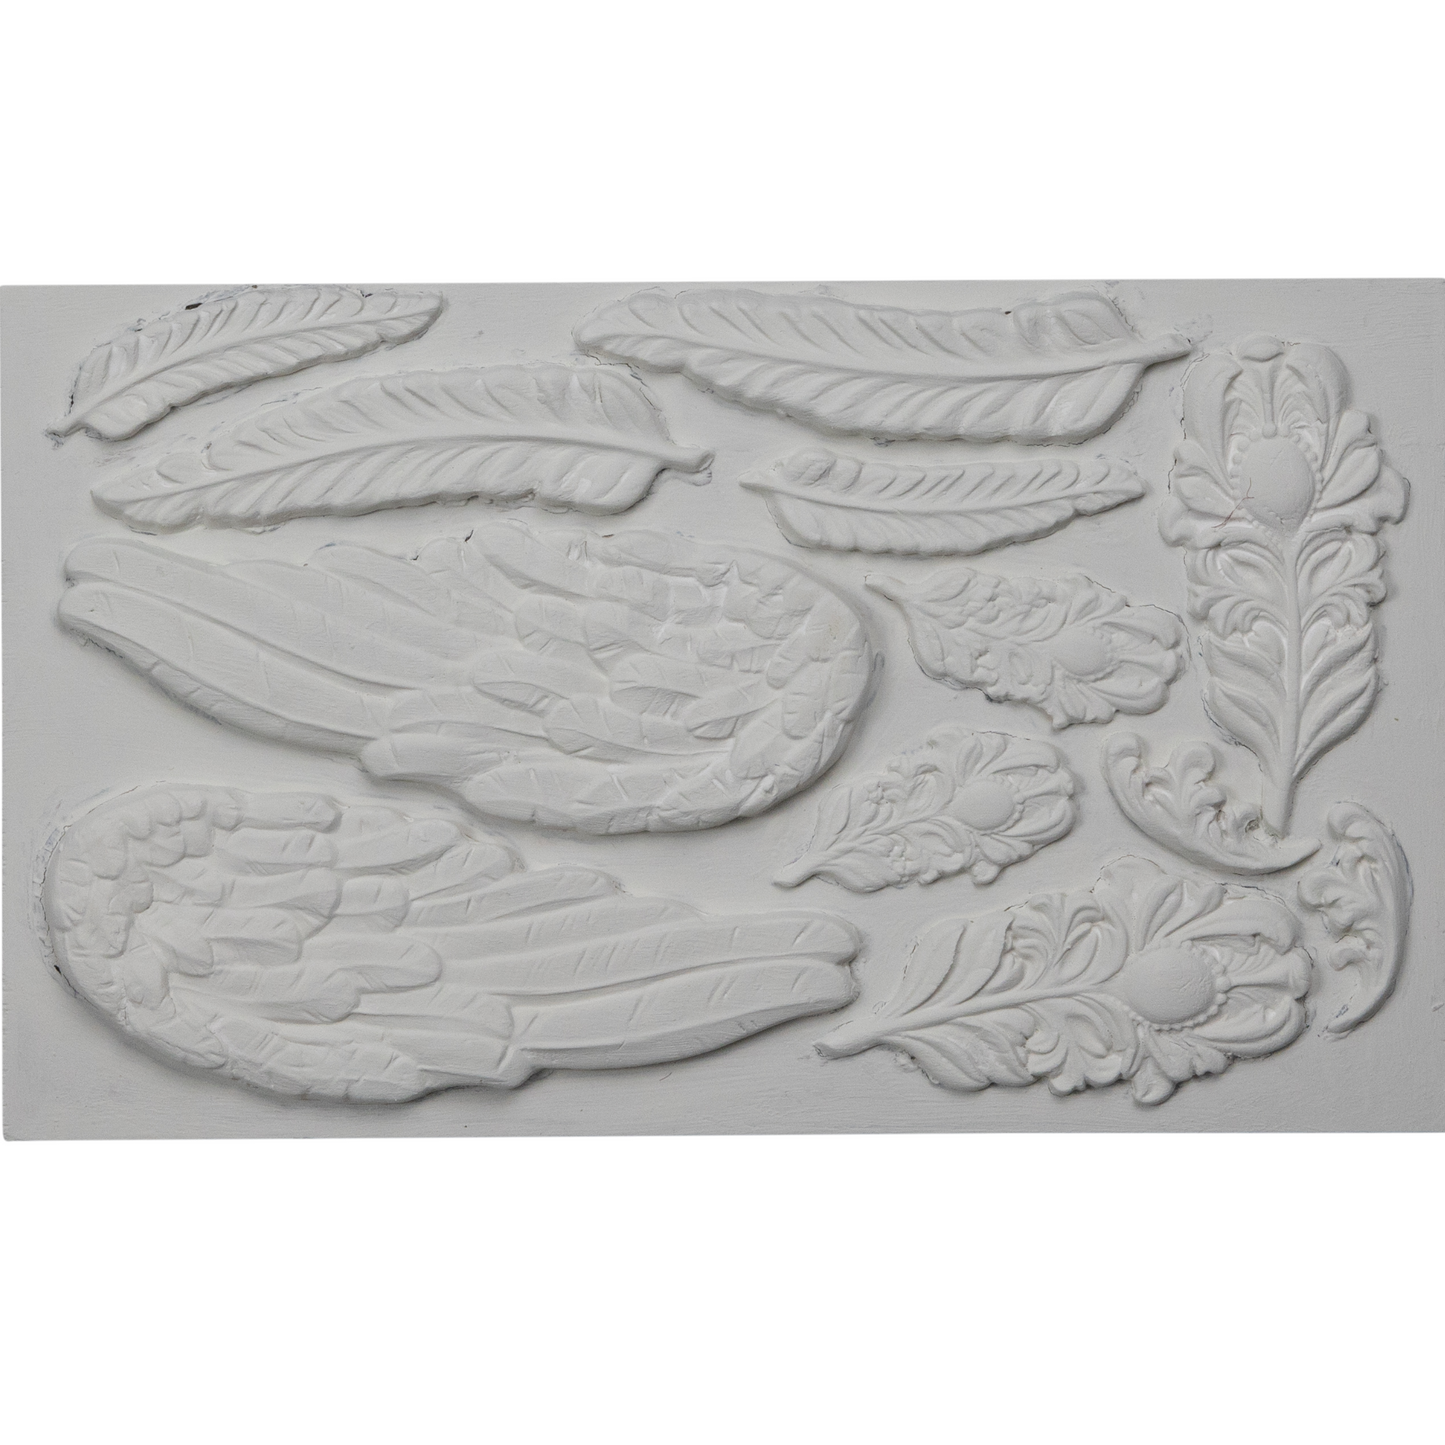 IOD Silicone Mold "Wings and Feathers" by Iron Orchid Designs.  Example castings. IOD moulds are available at Milton's Daughter